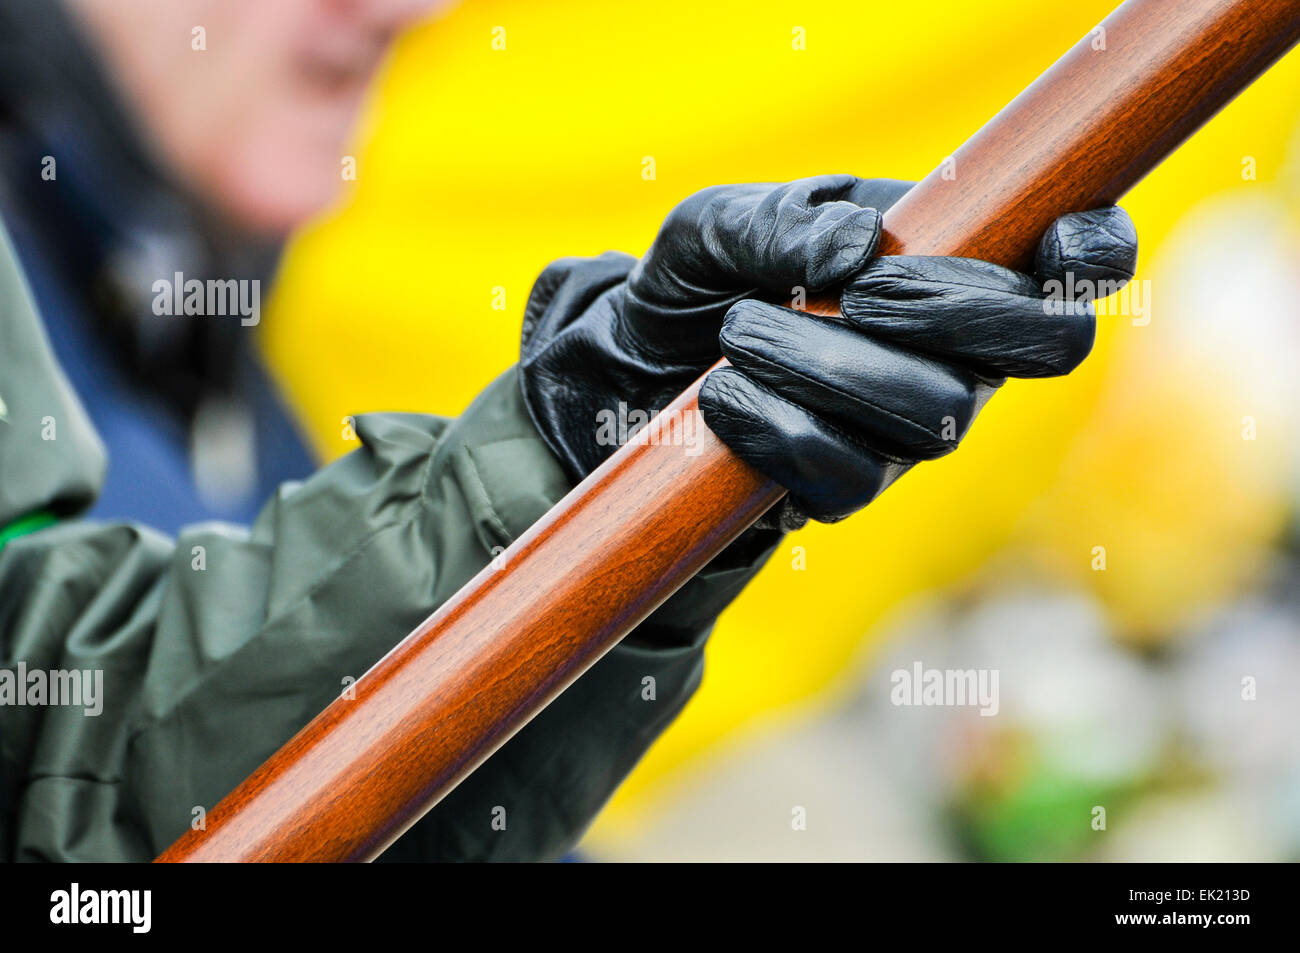 A person wearing a paramilitary style uniform with black gloves, holds a flag pole at an Irish Republican commemoration. Stock Photo